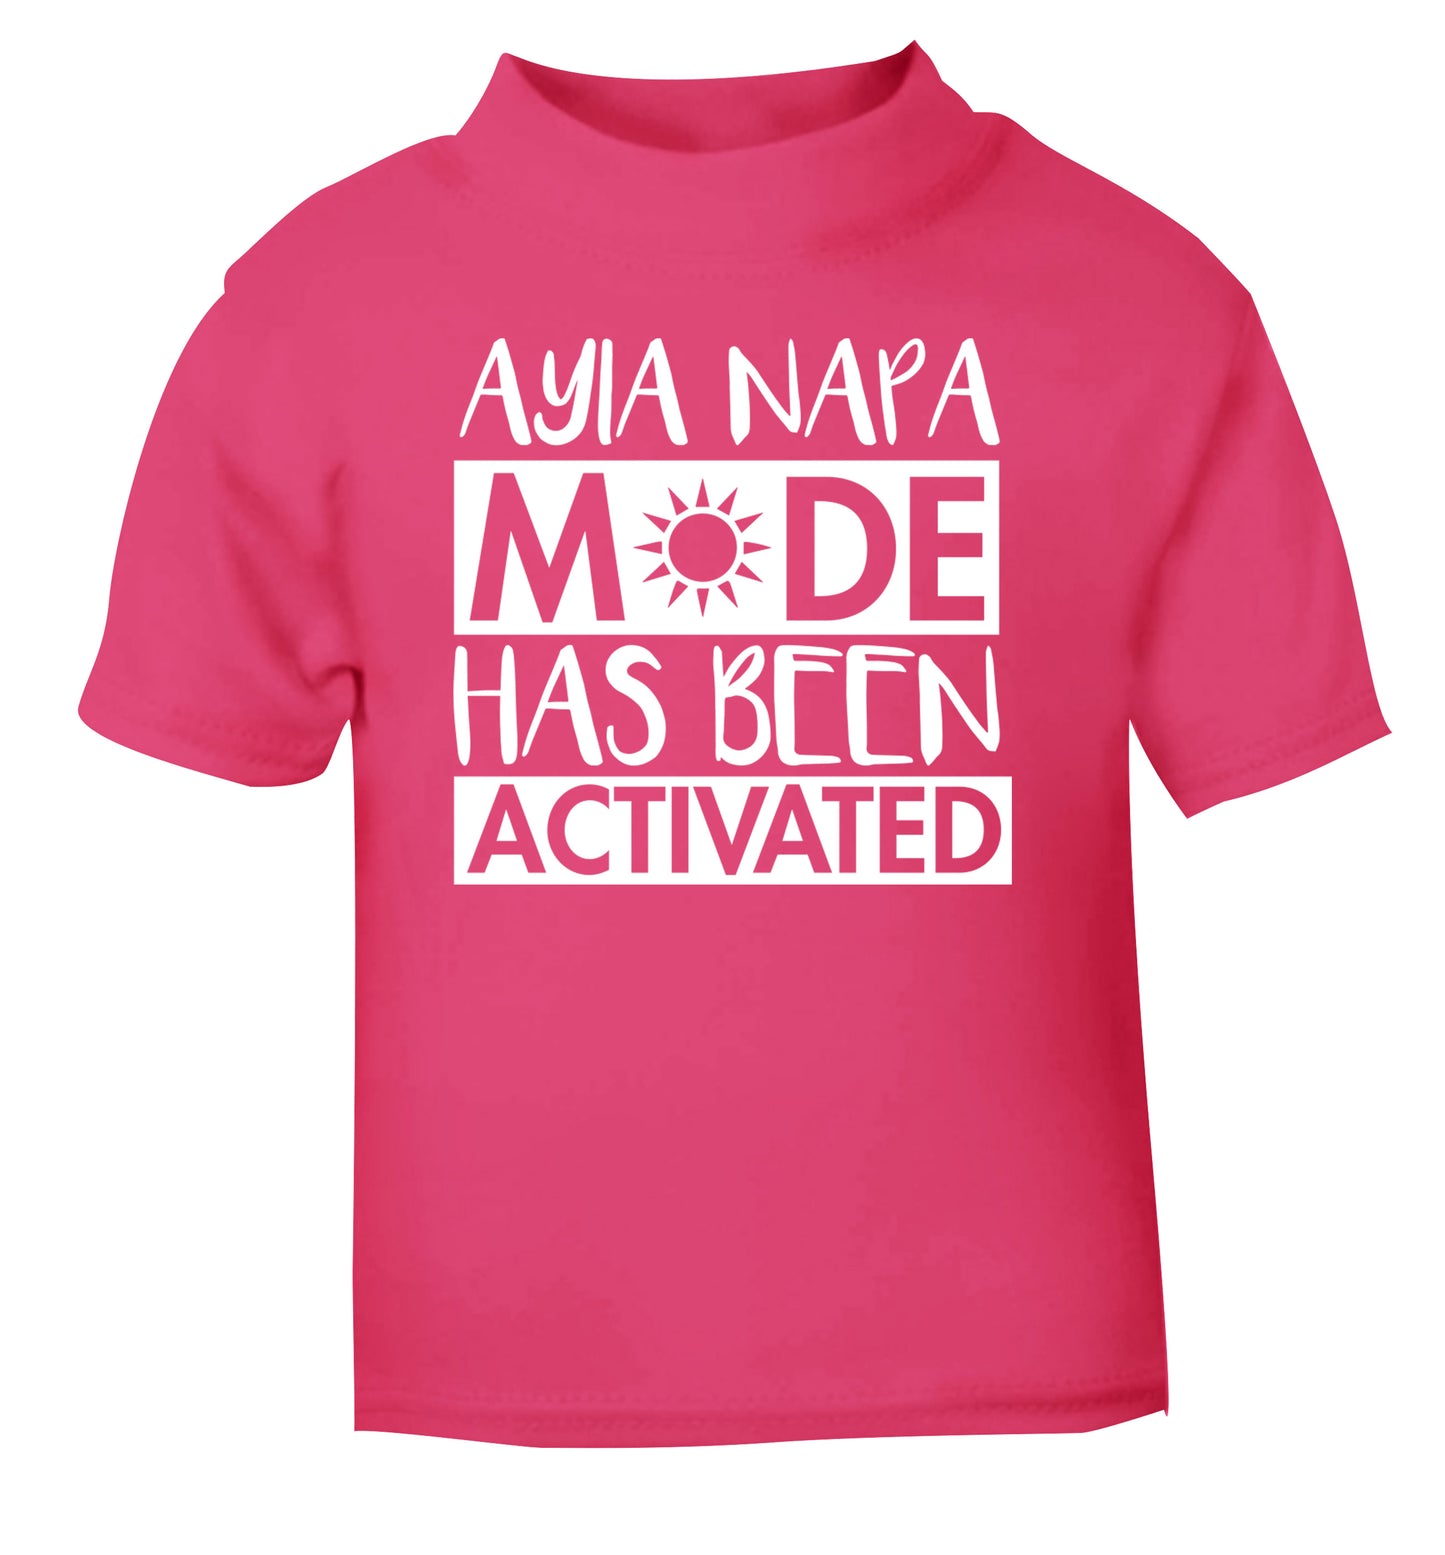 Ayia Napa mode has been activated pink Baby Toddler Tshirt 2 Years